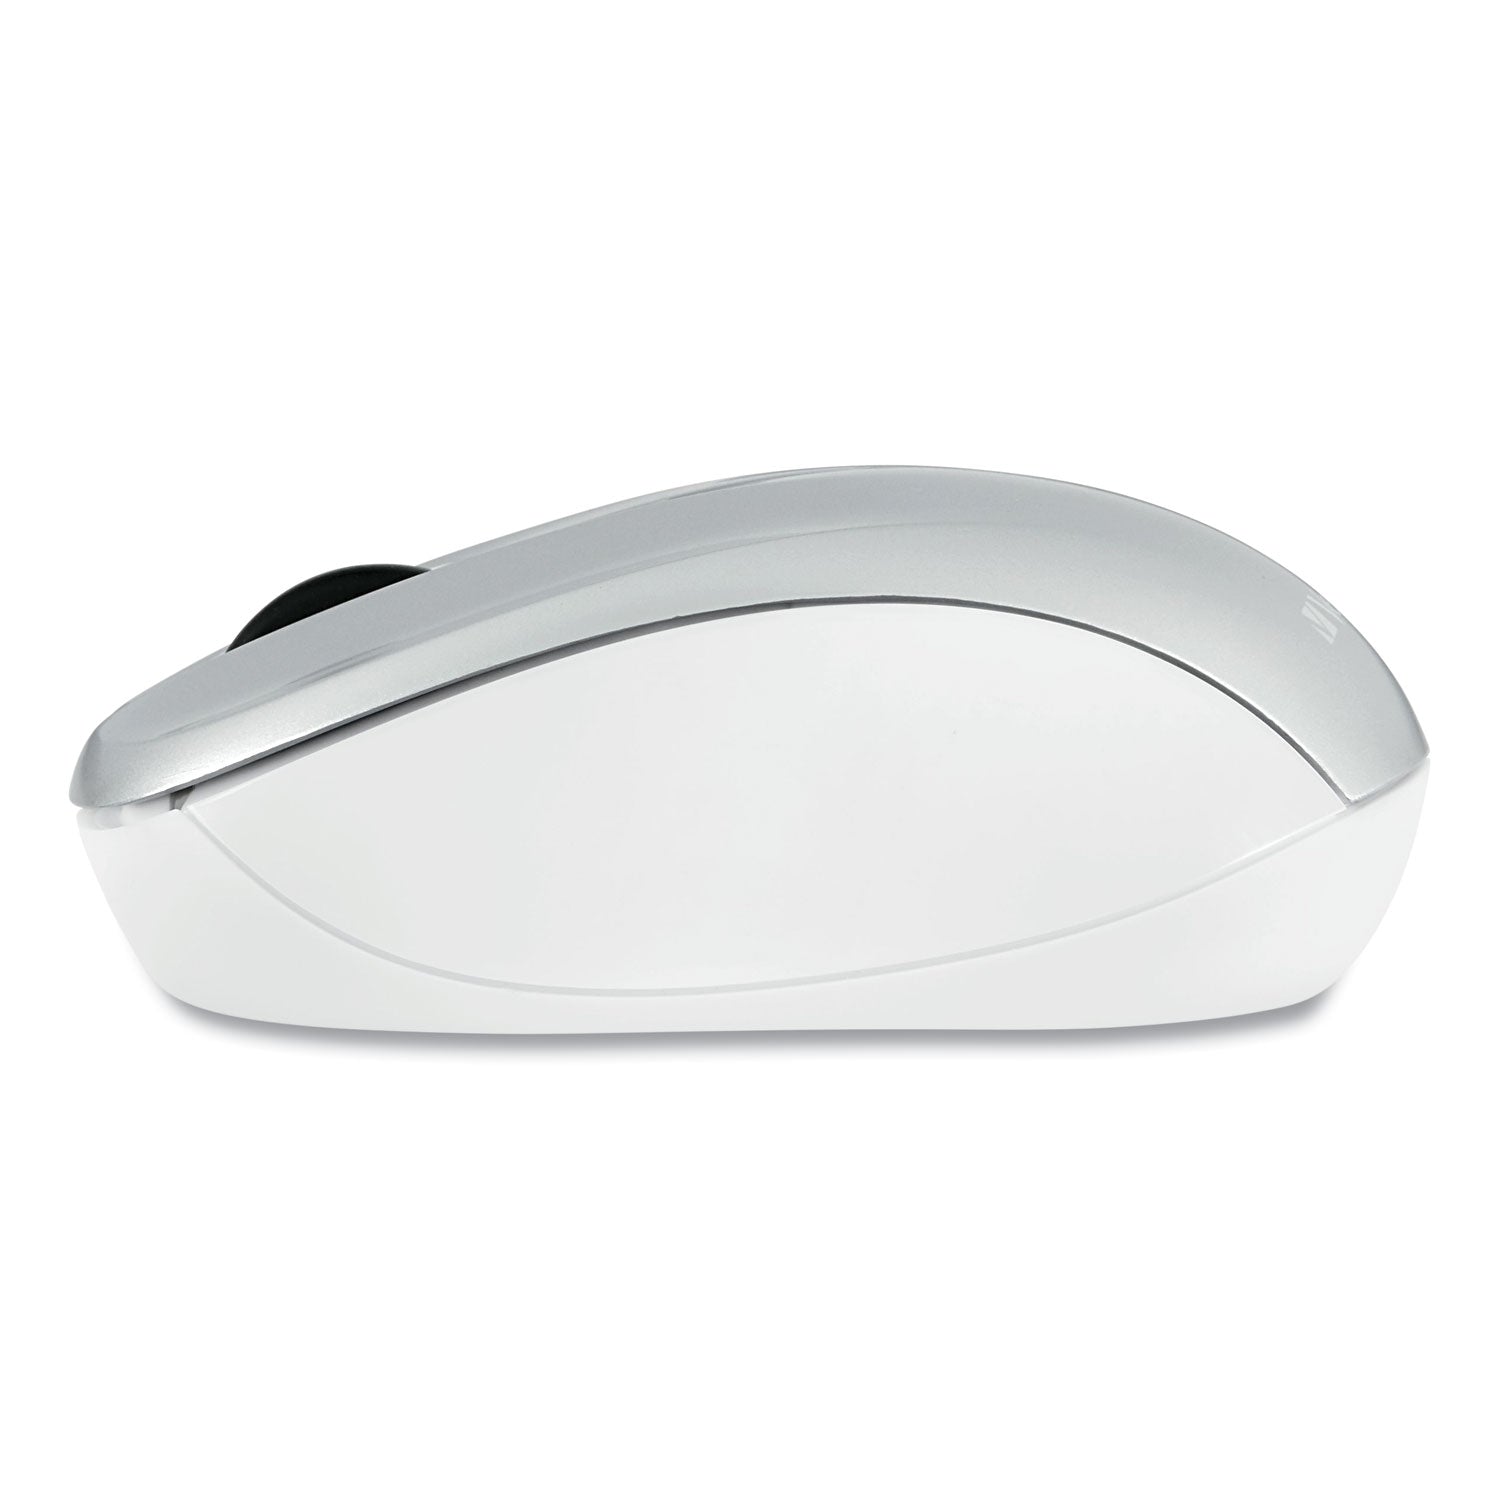 silent-wireless-blue-led-mouse-24-ghz-frequency-328-ft-wireless-range-left-right-hand-use-silver_ver99777 - 4